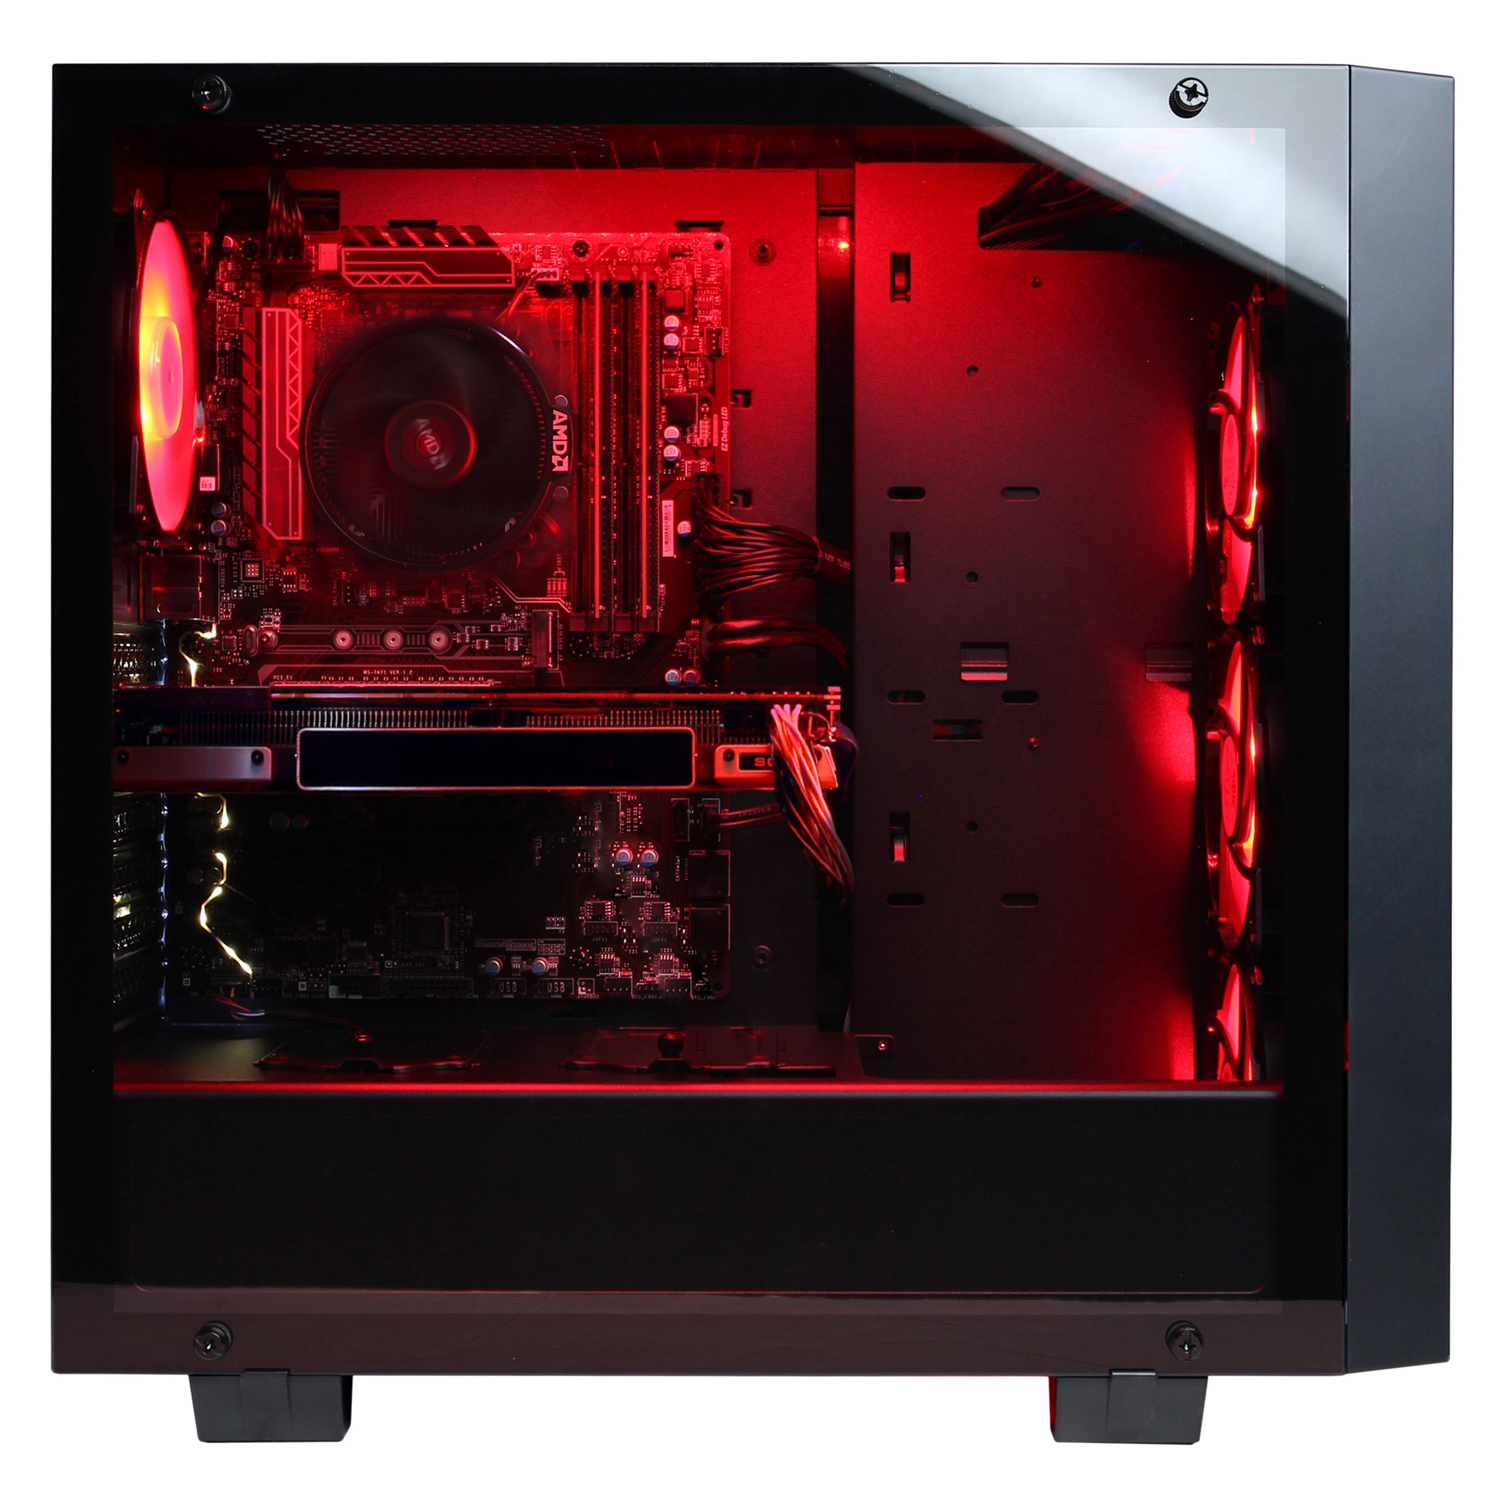 CYBERPOWERPC Gamer Master GMA6400CPG w/ AMD Ryzen 7 2700X Processor, NVIDIA GeForce GTX 1070 Ti Graphics, 16GB Memory, 240GB SSD, 2TB Hard Drive and Windows 10 Home (Monitor Not Included) - image 5 of 56